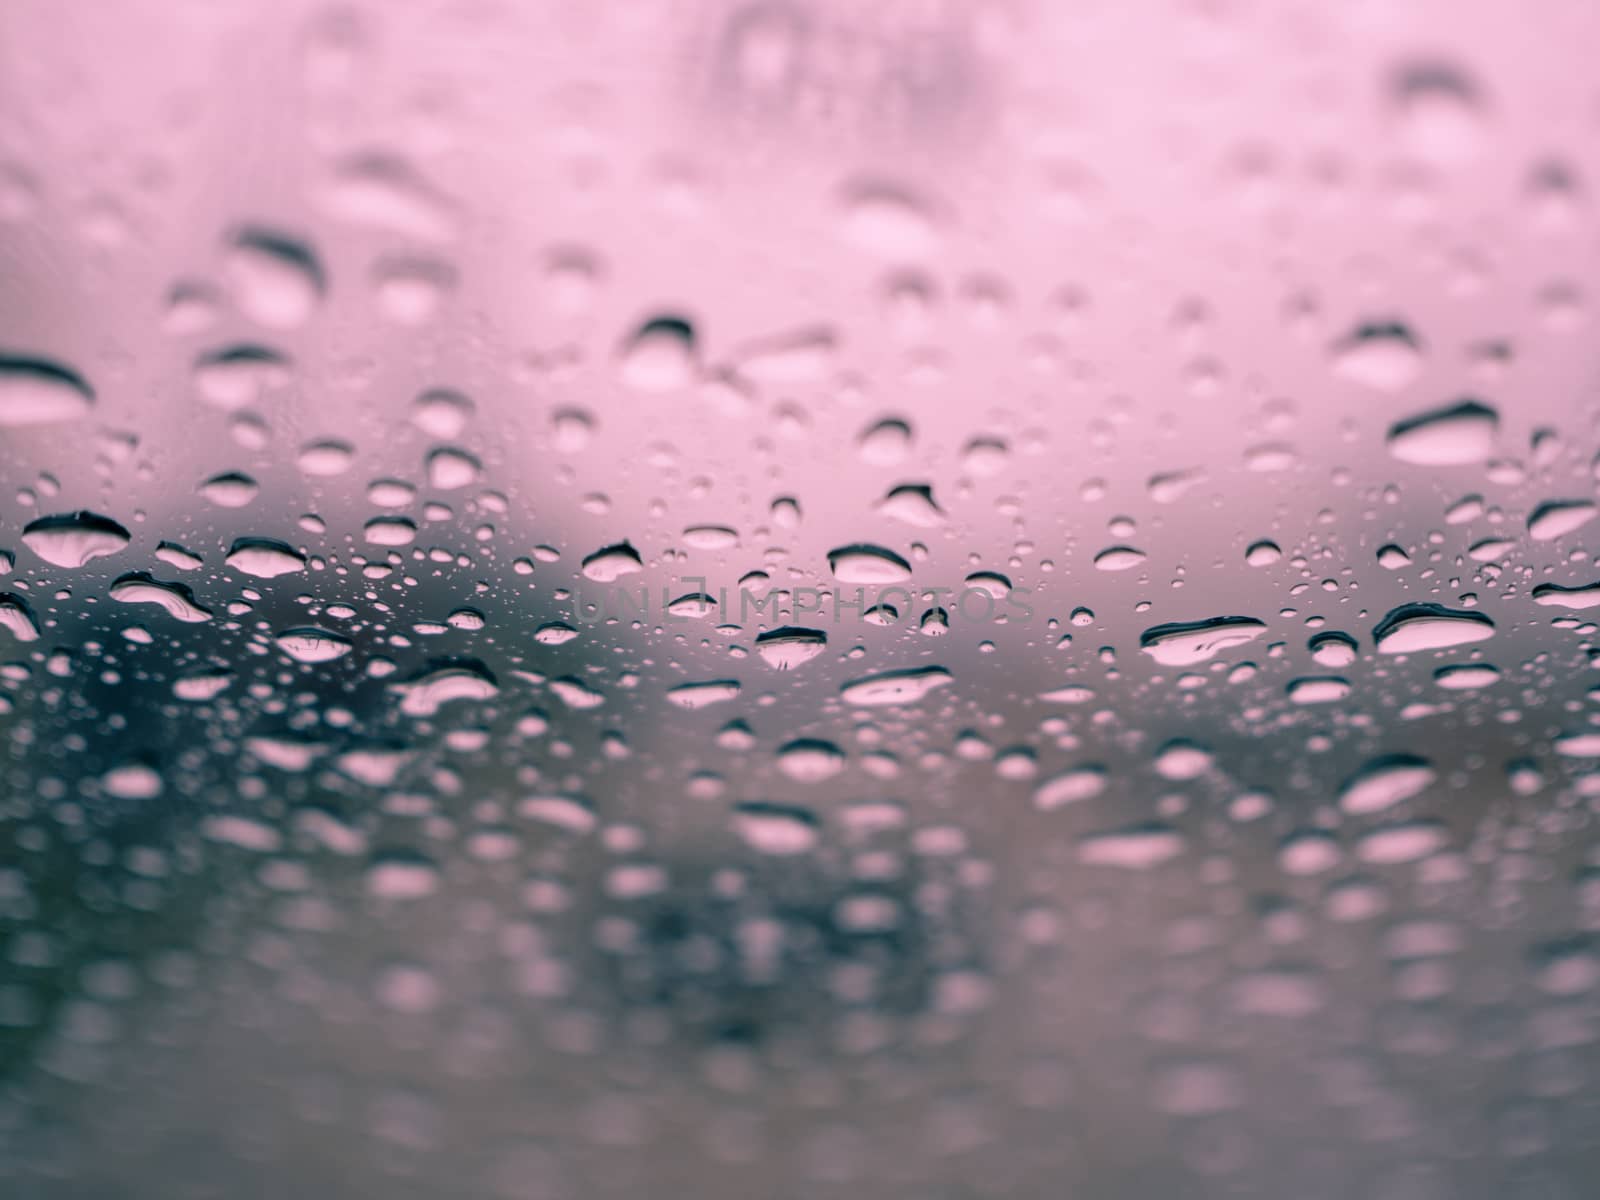 Rain drops on the glass during the heavy rains in the rainy seas by Unimages2527